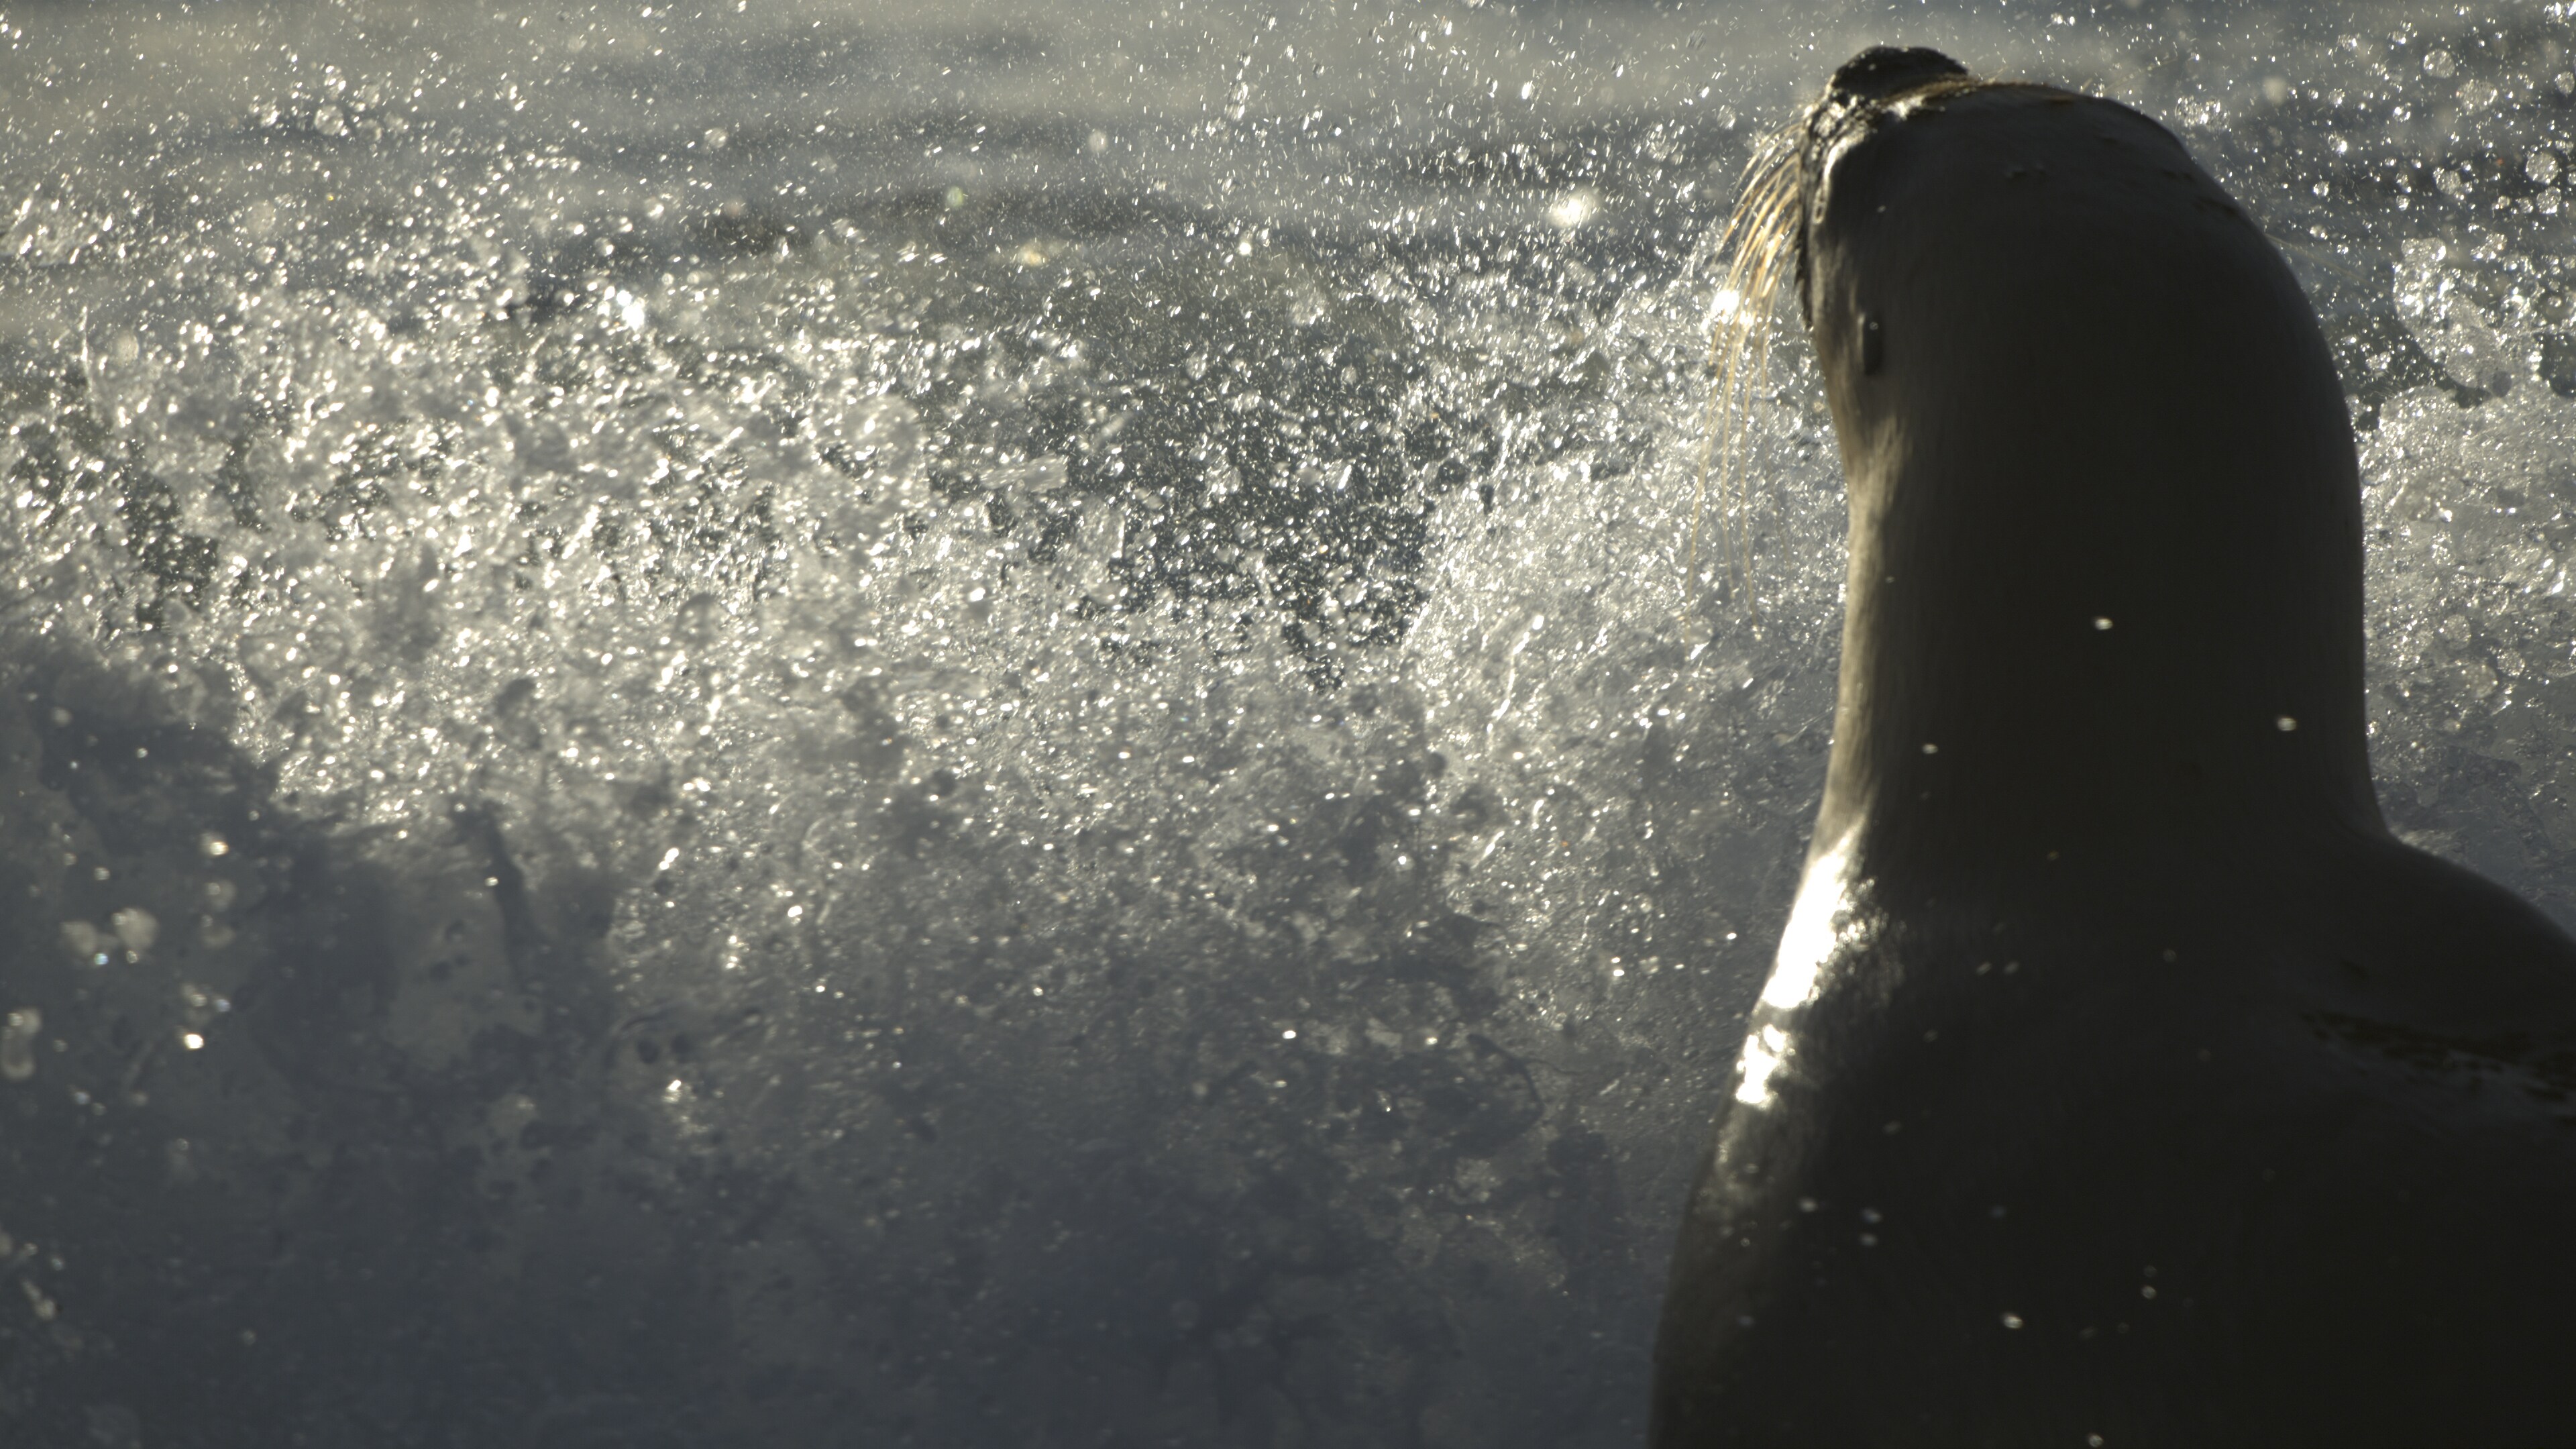 South American sea lions are agile swimmers, but one family of orcas has developed a strategy to take them from the beach. (National Geographic for Disney+/Hayes Baxley)